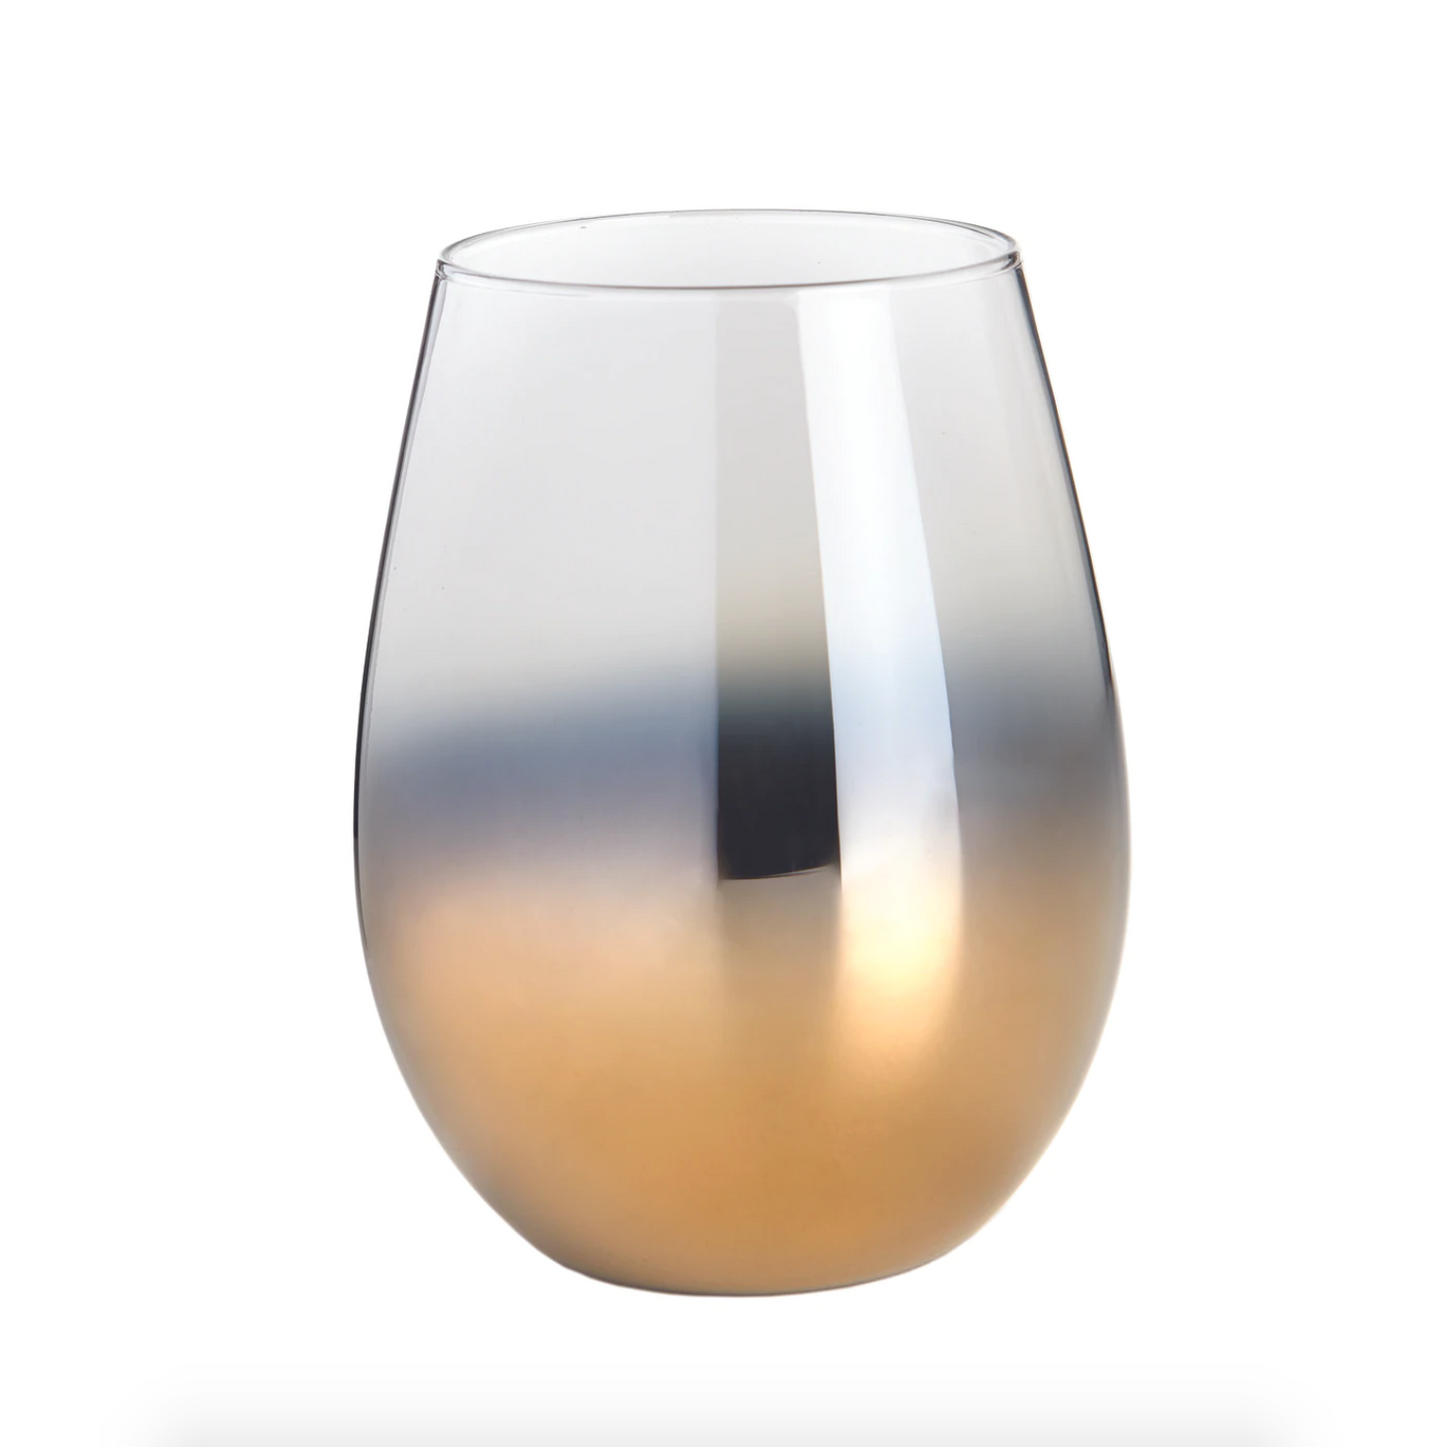 CARISO GOLD STEMLESS GLASSES - SET OF 4